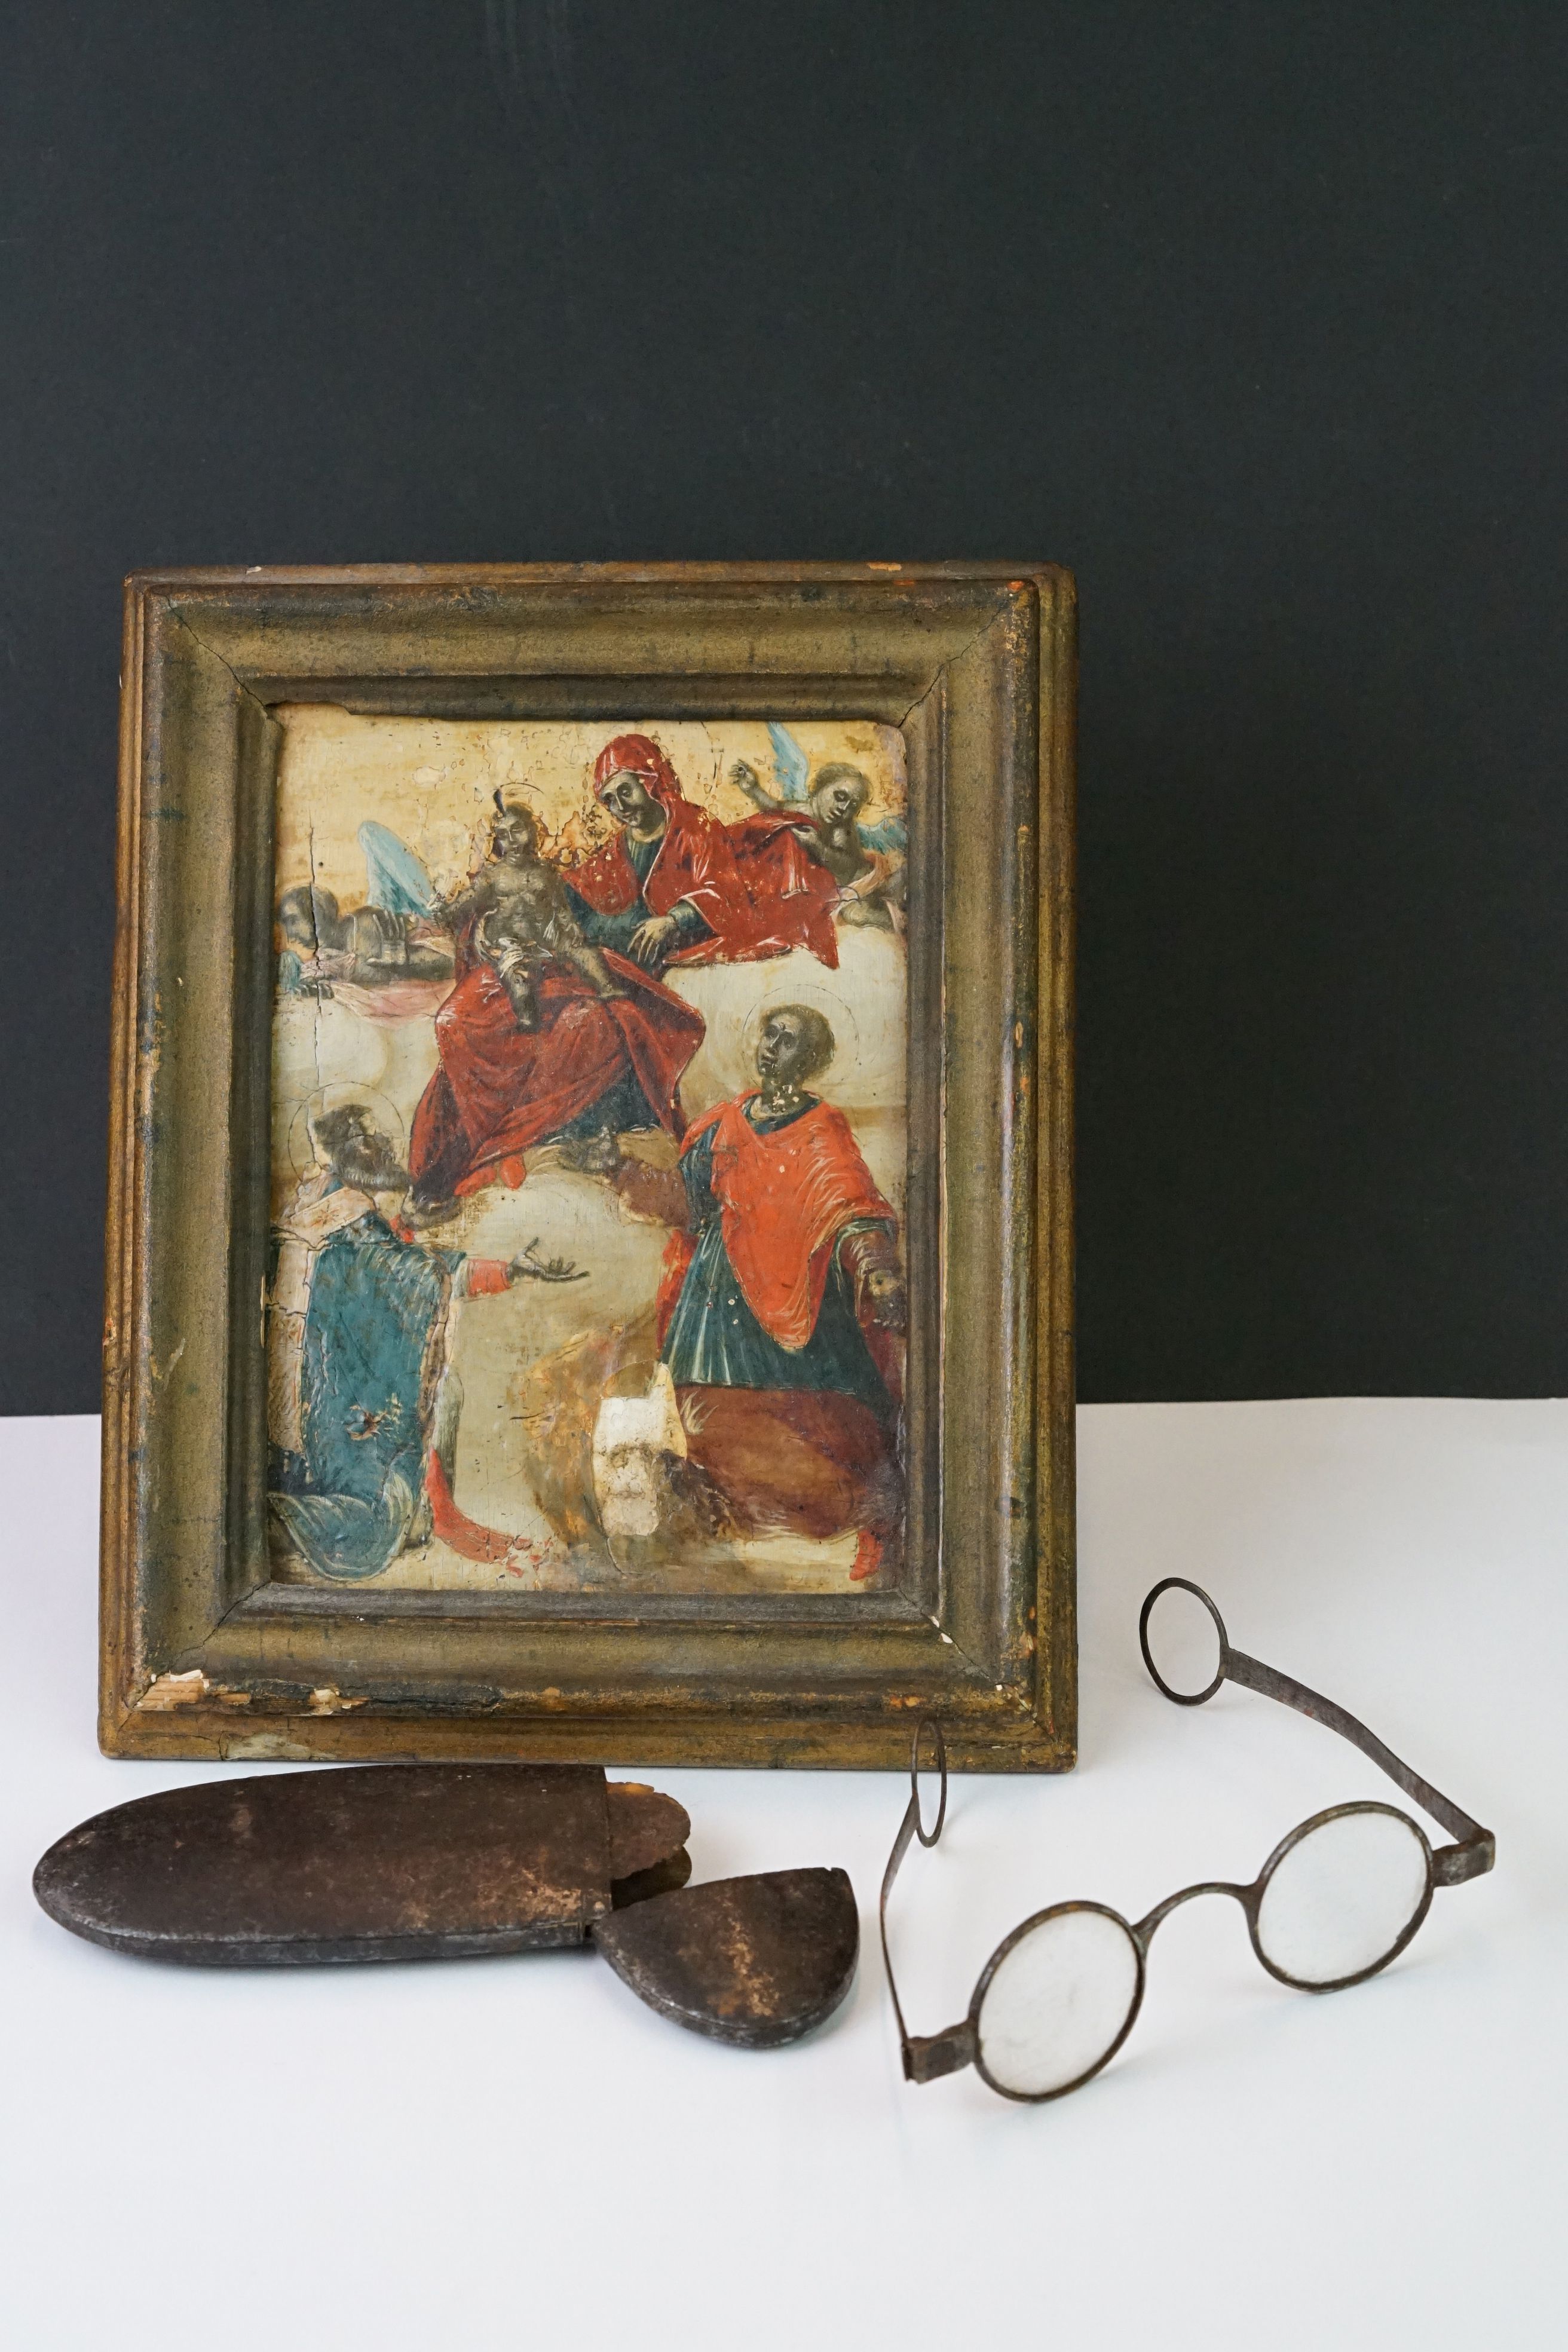 An antique Eastern European icon together with a pair on antique glasses.